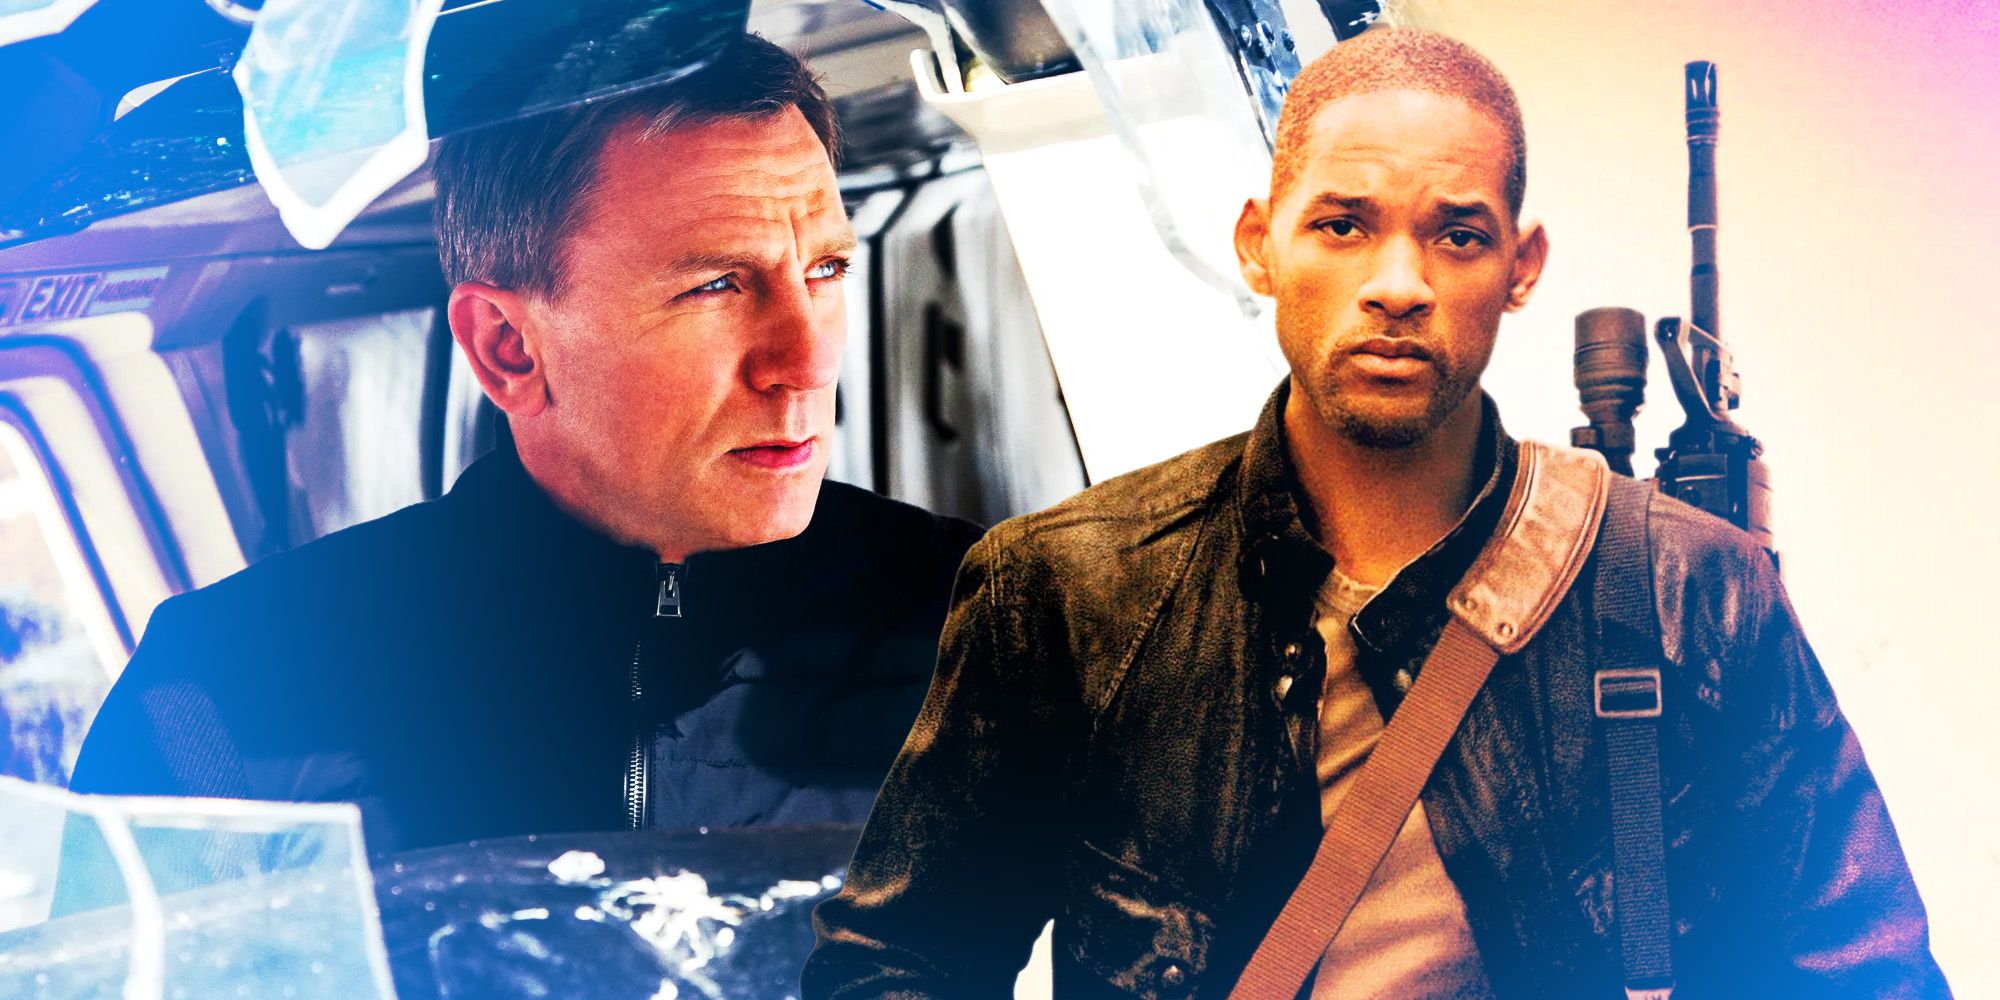 Collage image of Daniel Craig in Spectre and Will Smith in I Am Legend